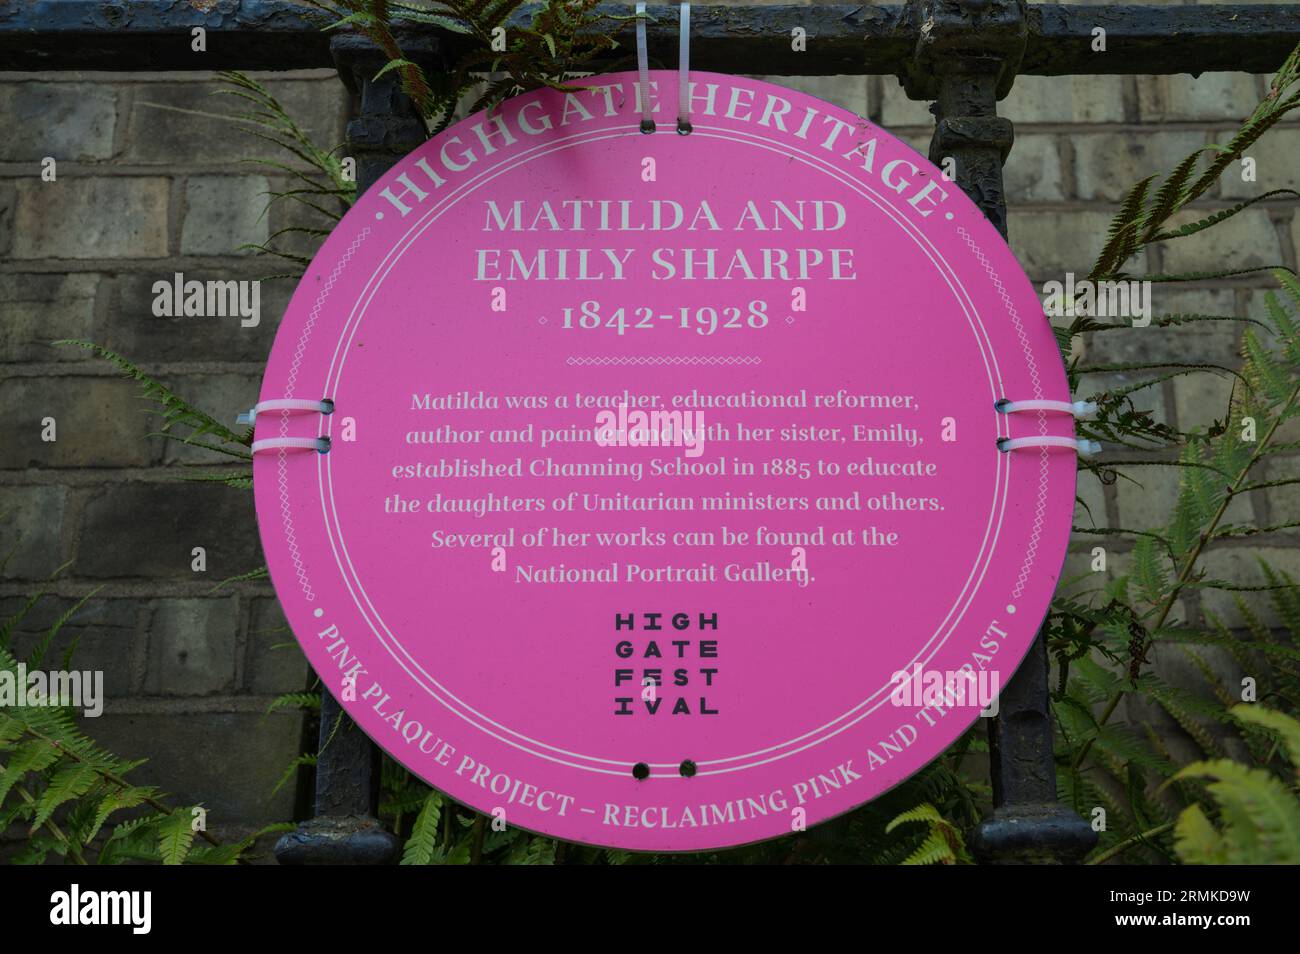 Highgate Pink Plaques Project honouring the lives of notable Highgate women. Highgate, London N6 England, UK Stock Photo